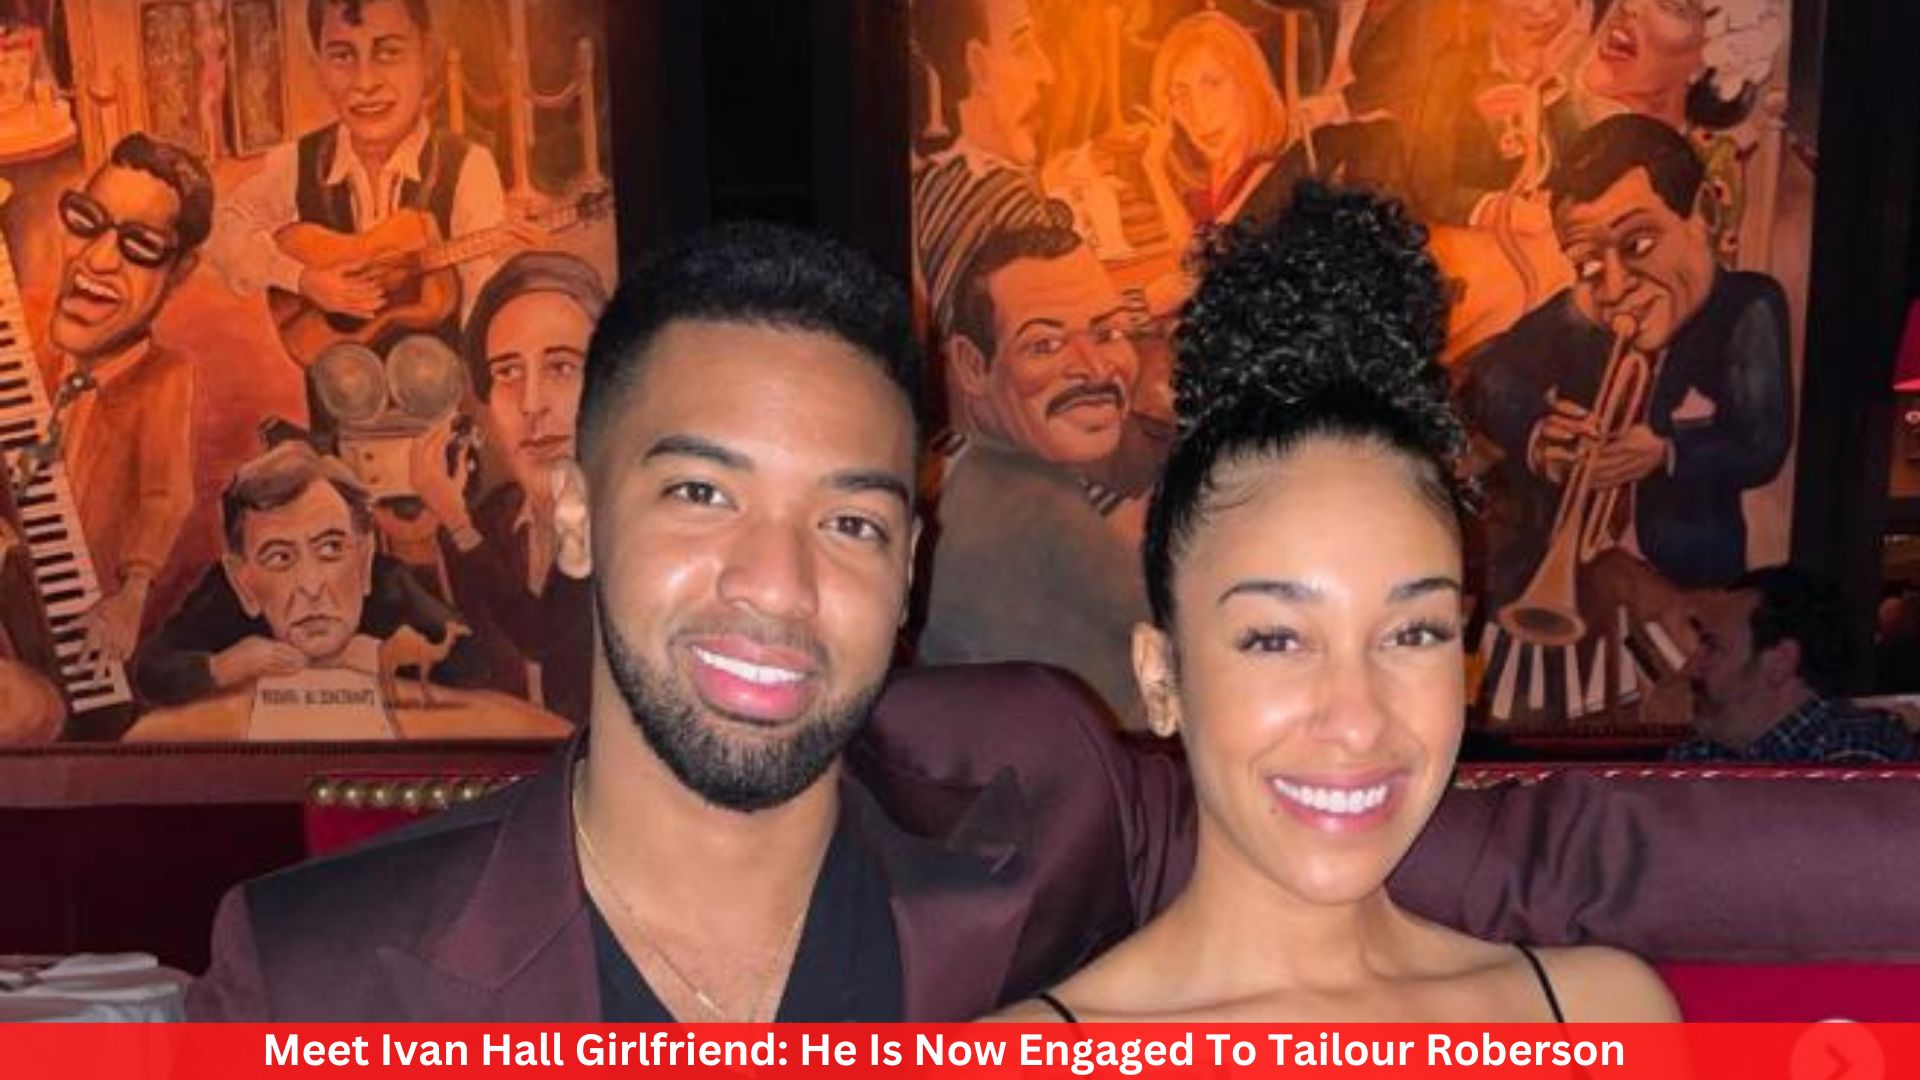 Meet Ivan Hall Girlfriend: He Is Now Engaged To Tailour Roberson